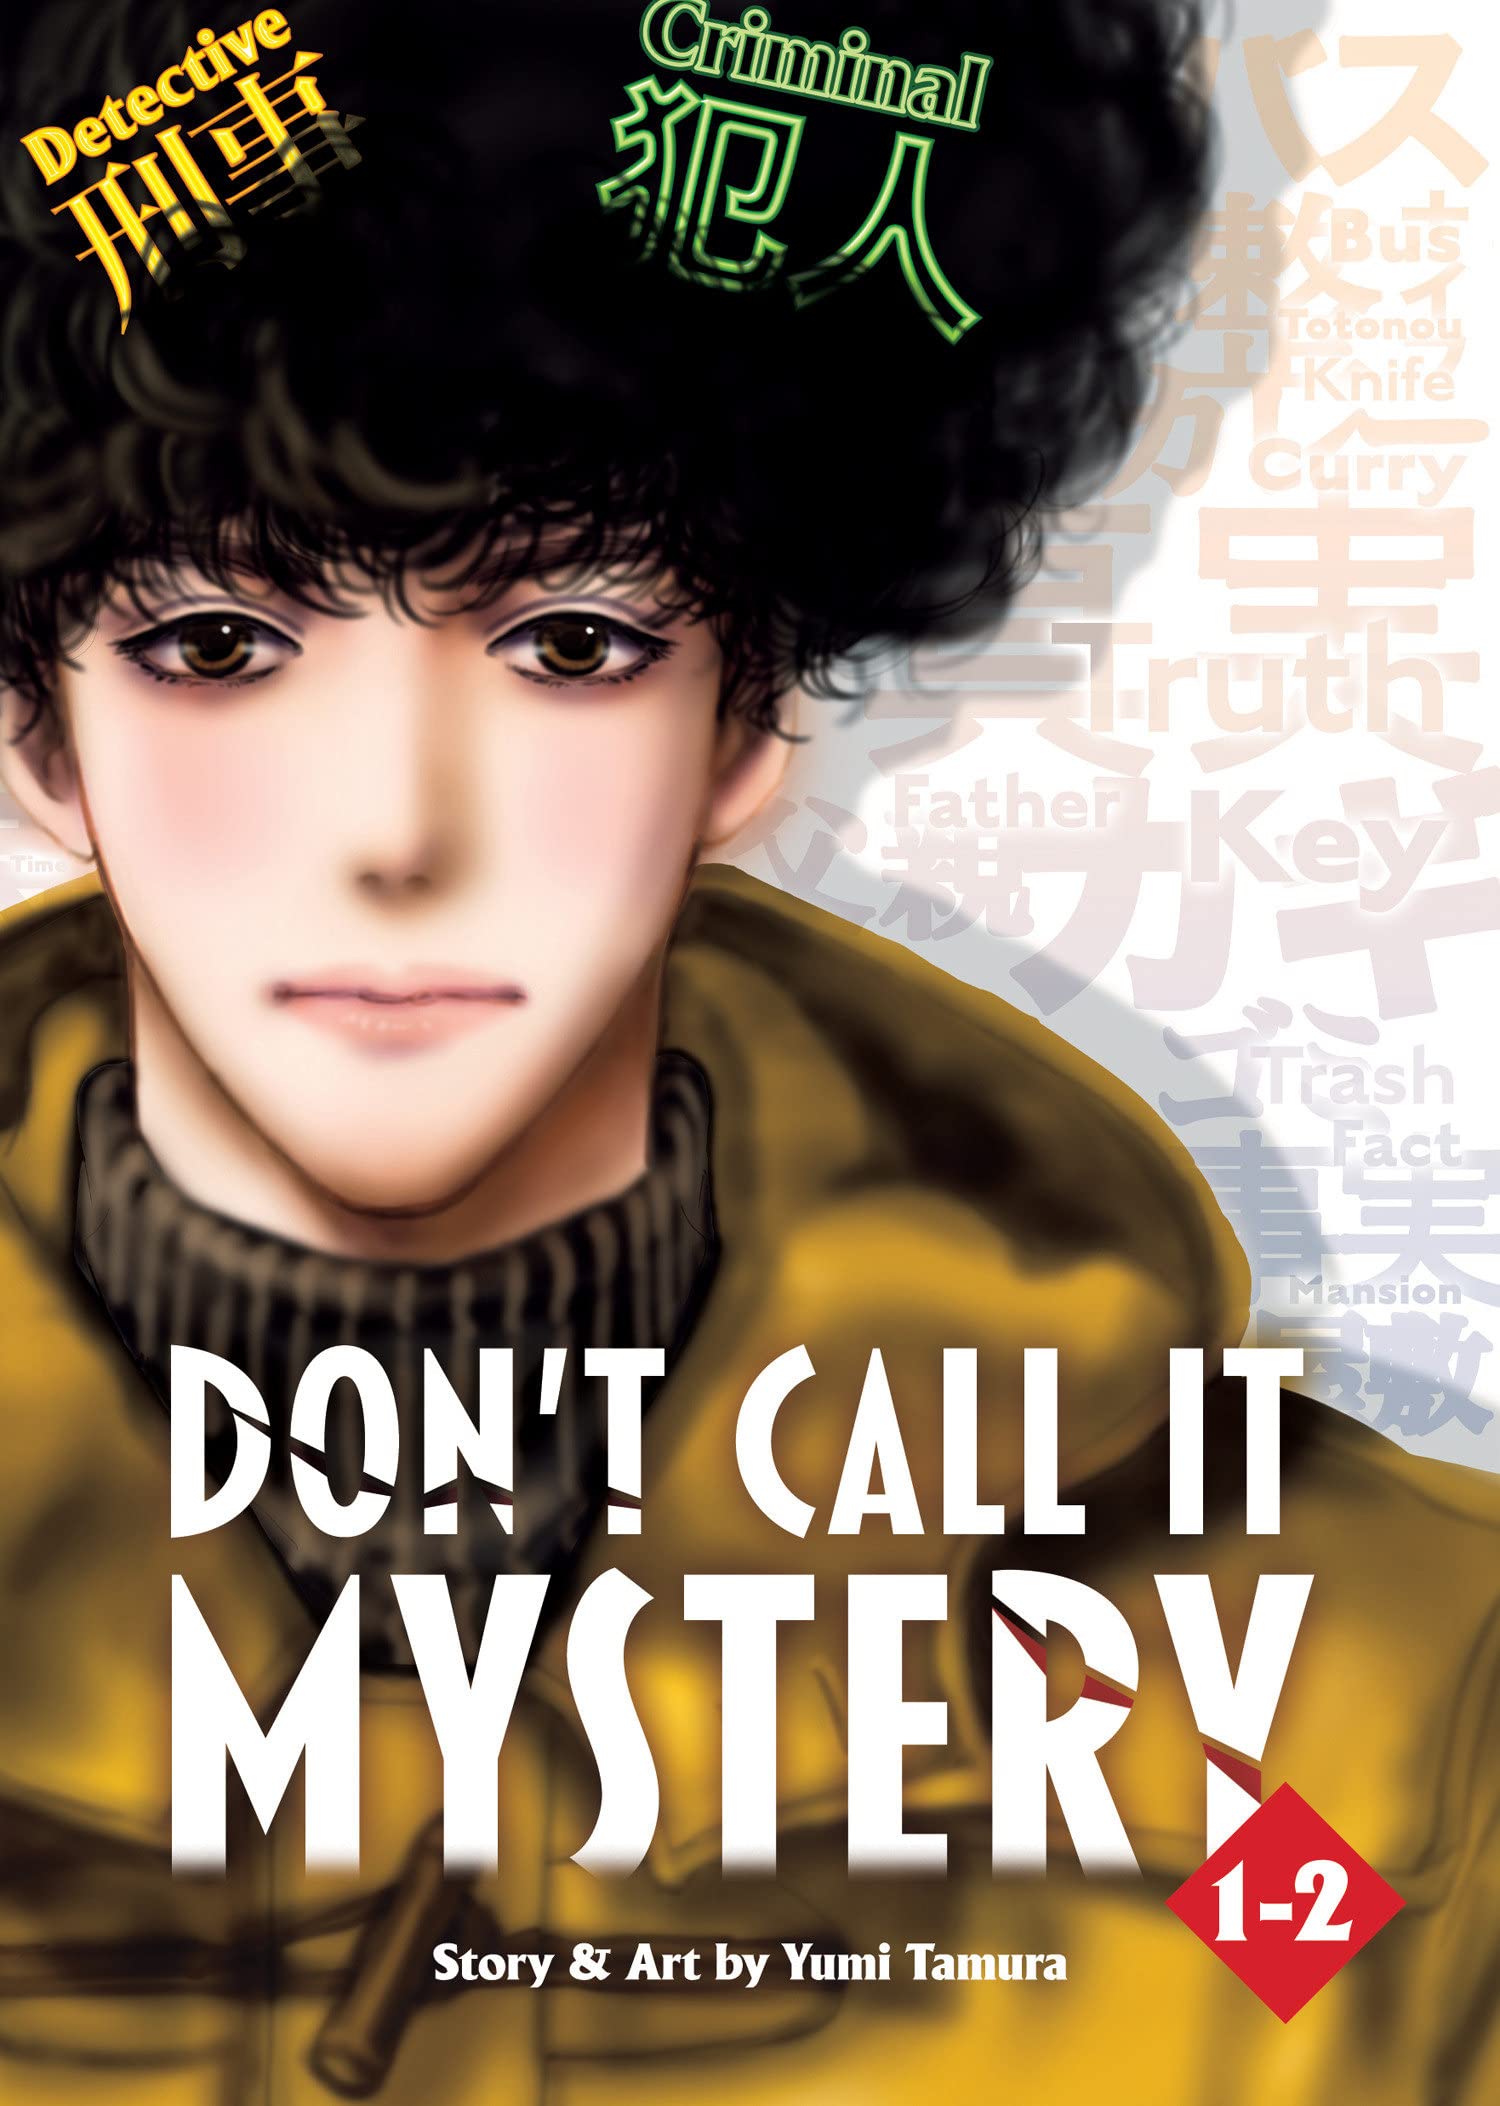 Don't Call It Mystery (Omnibus) Vol. 01-02